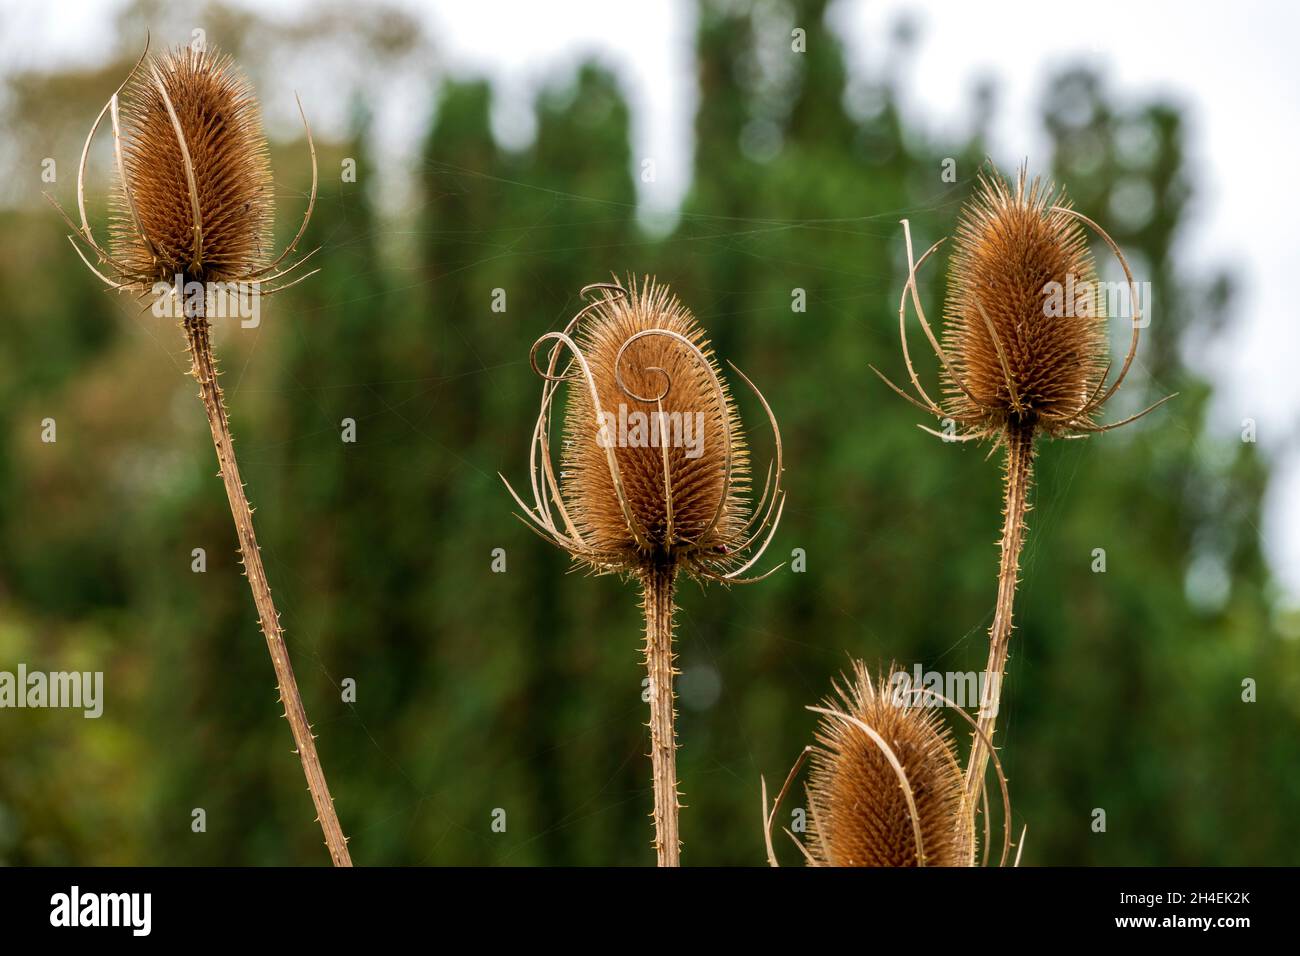 Dried teasel heads against a soft focus background Stock Photo